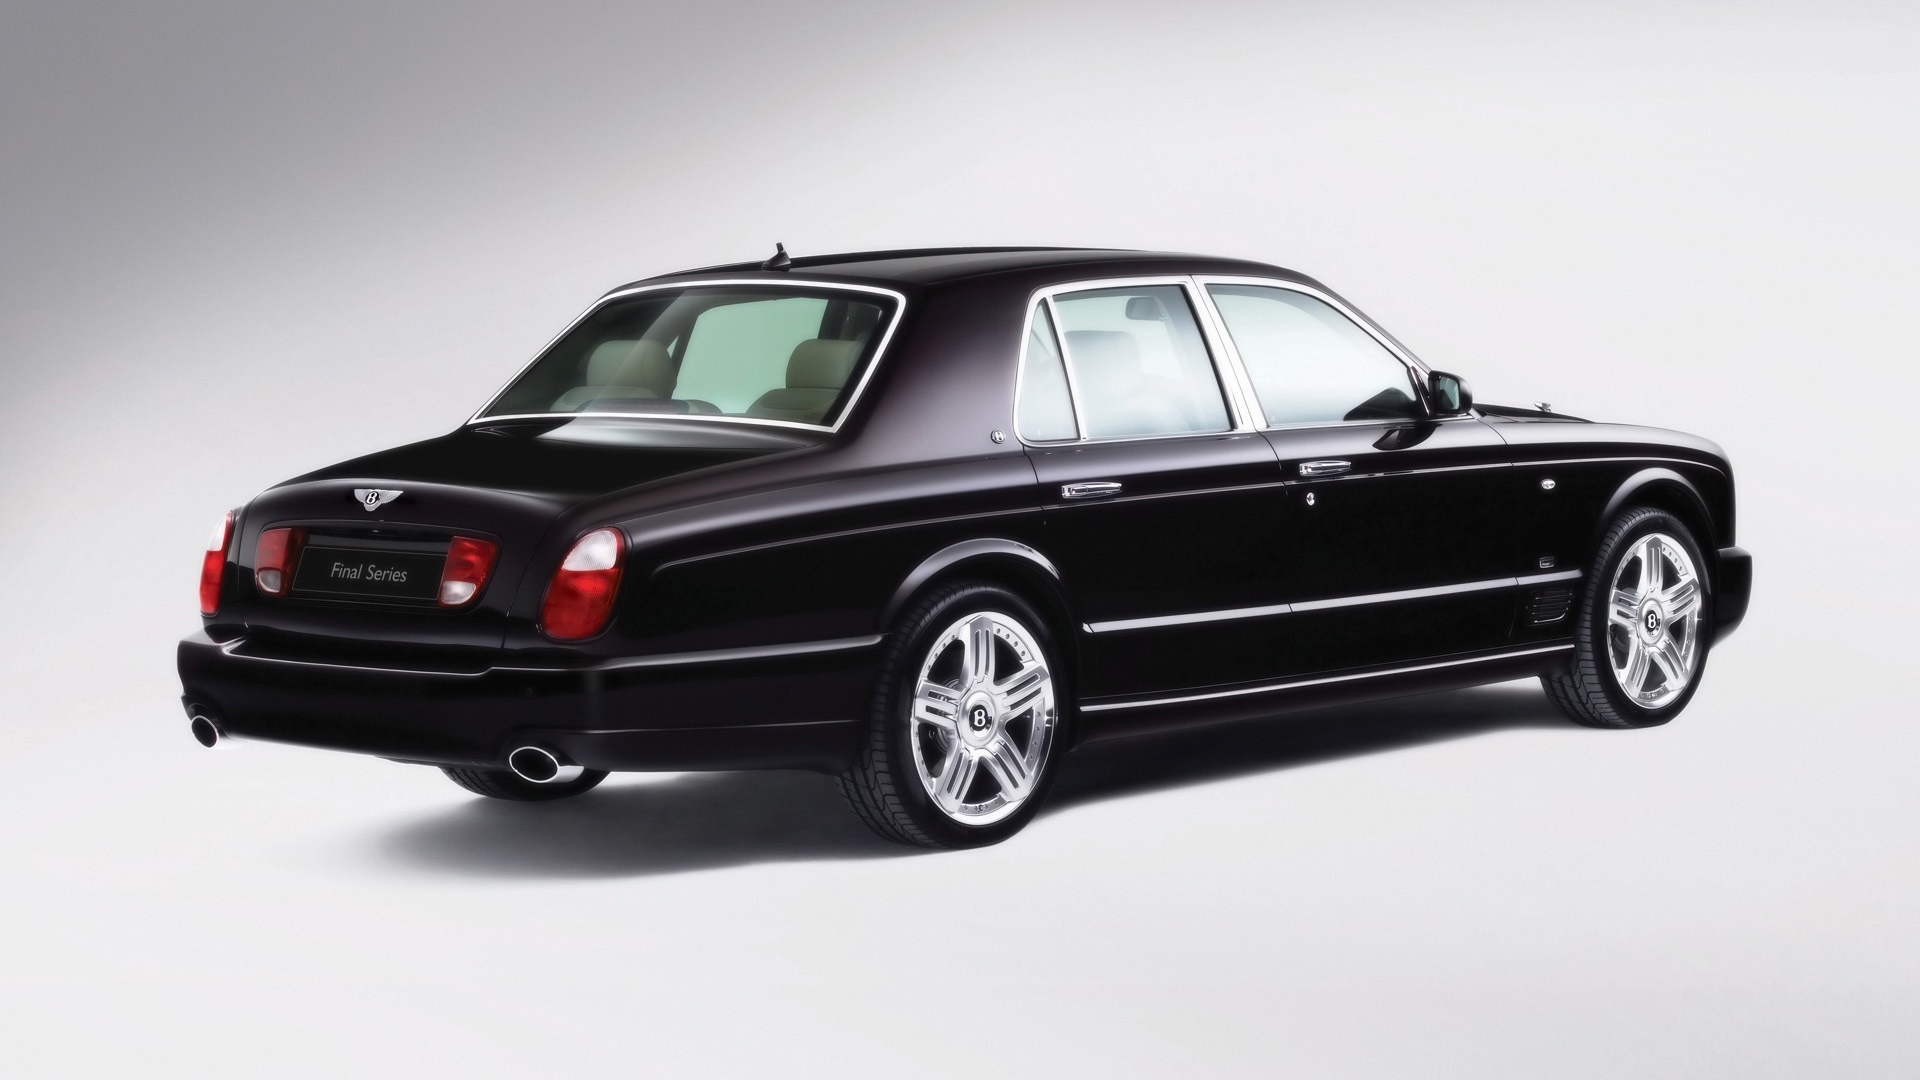 Bentley Arnage Final Series 2009 Rear for 1920 x 1080 HDTV 1080p resolution